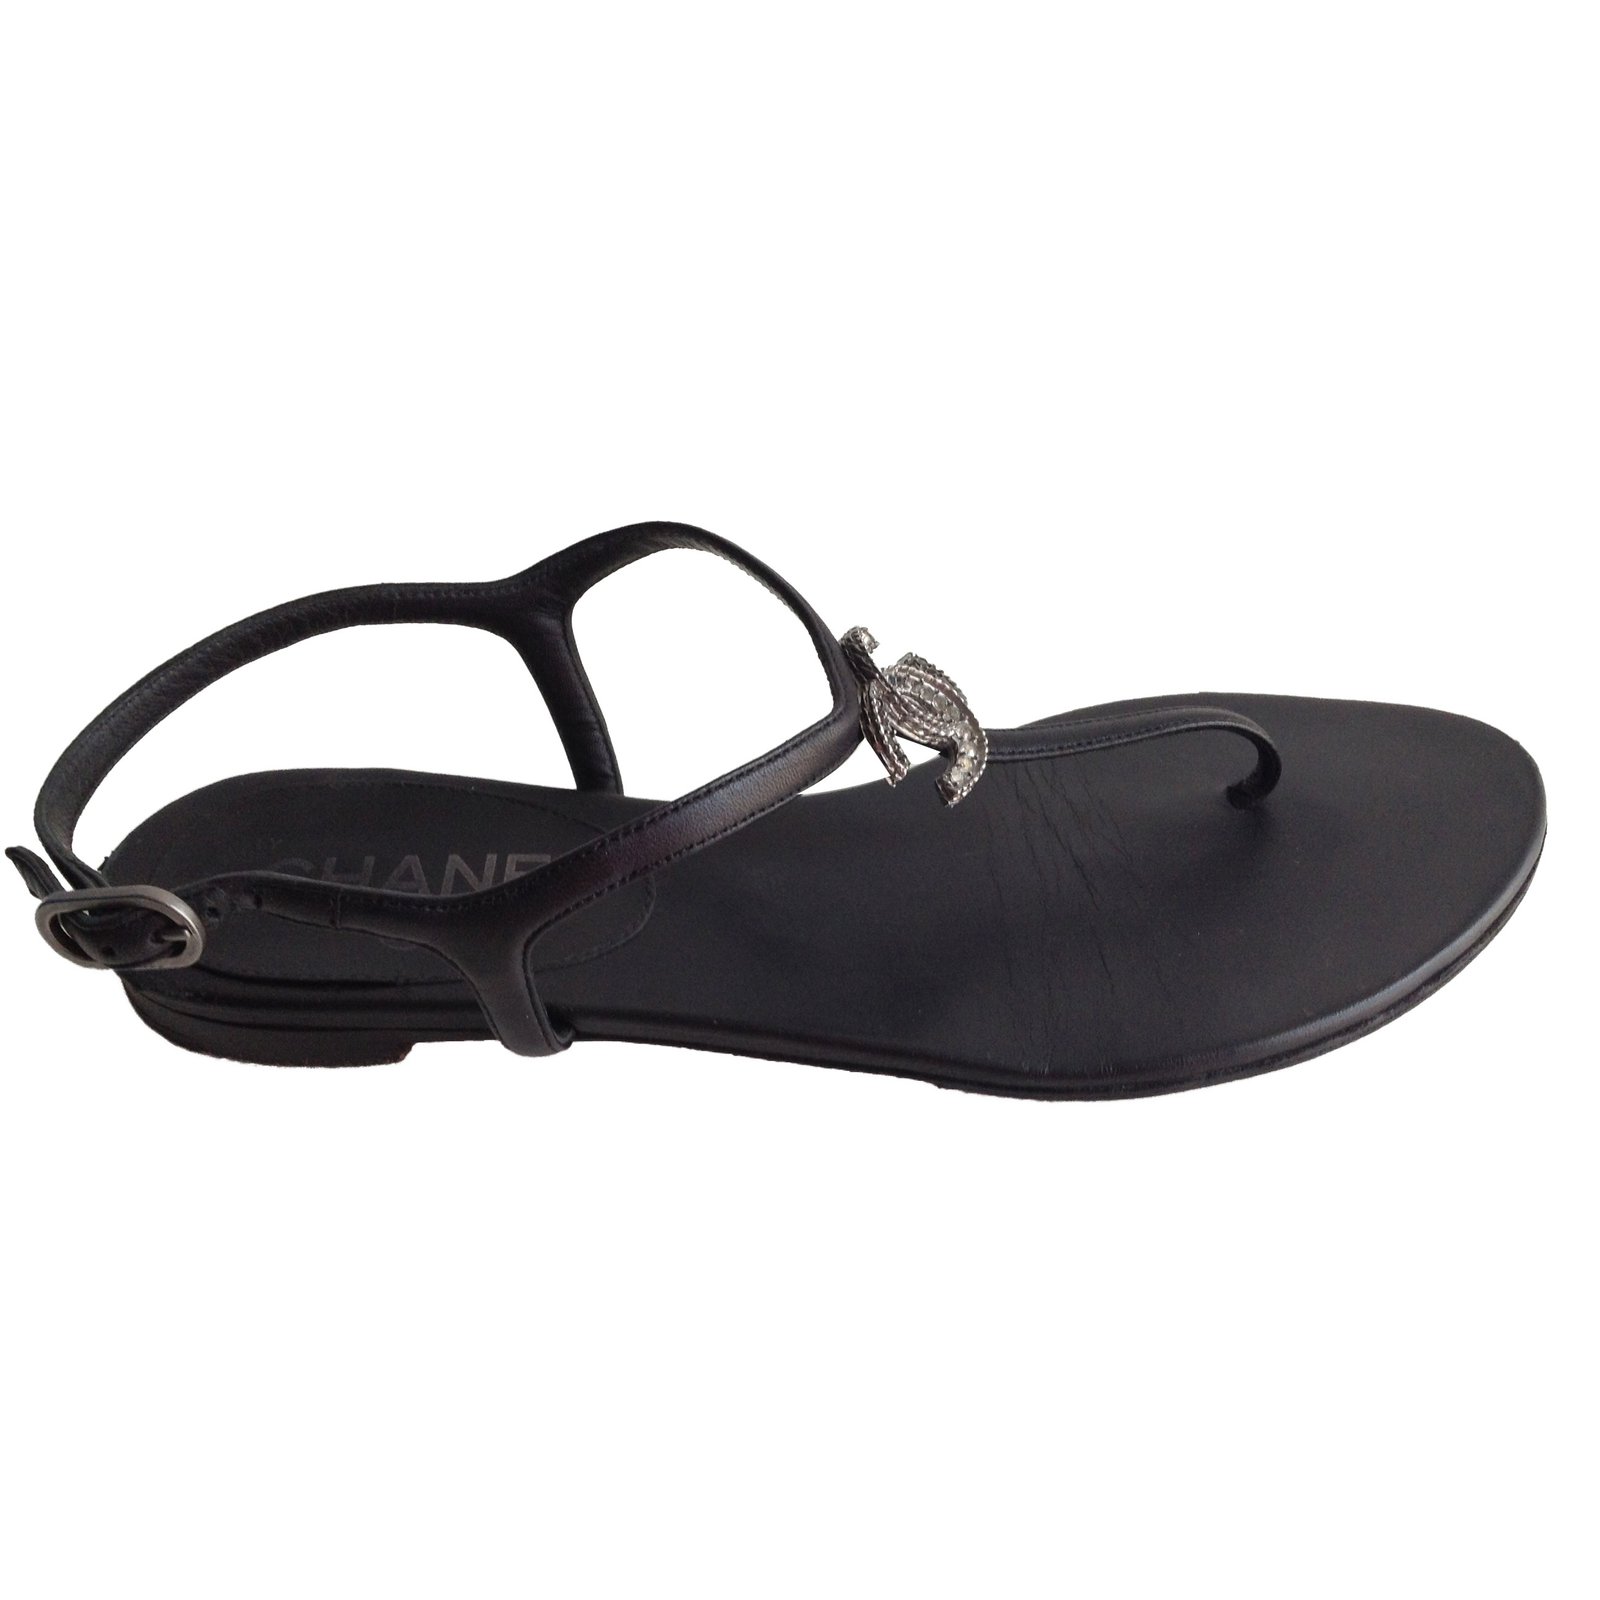 Dad sandals leather sandal Chanel Black size 39 EU in Leather - 17979876